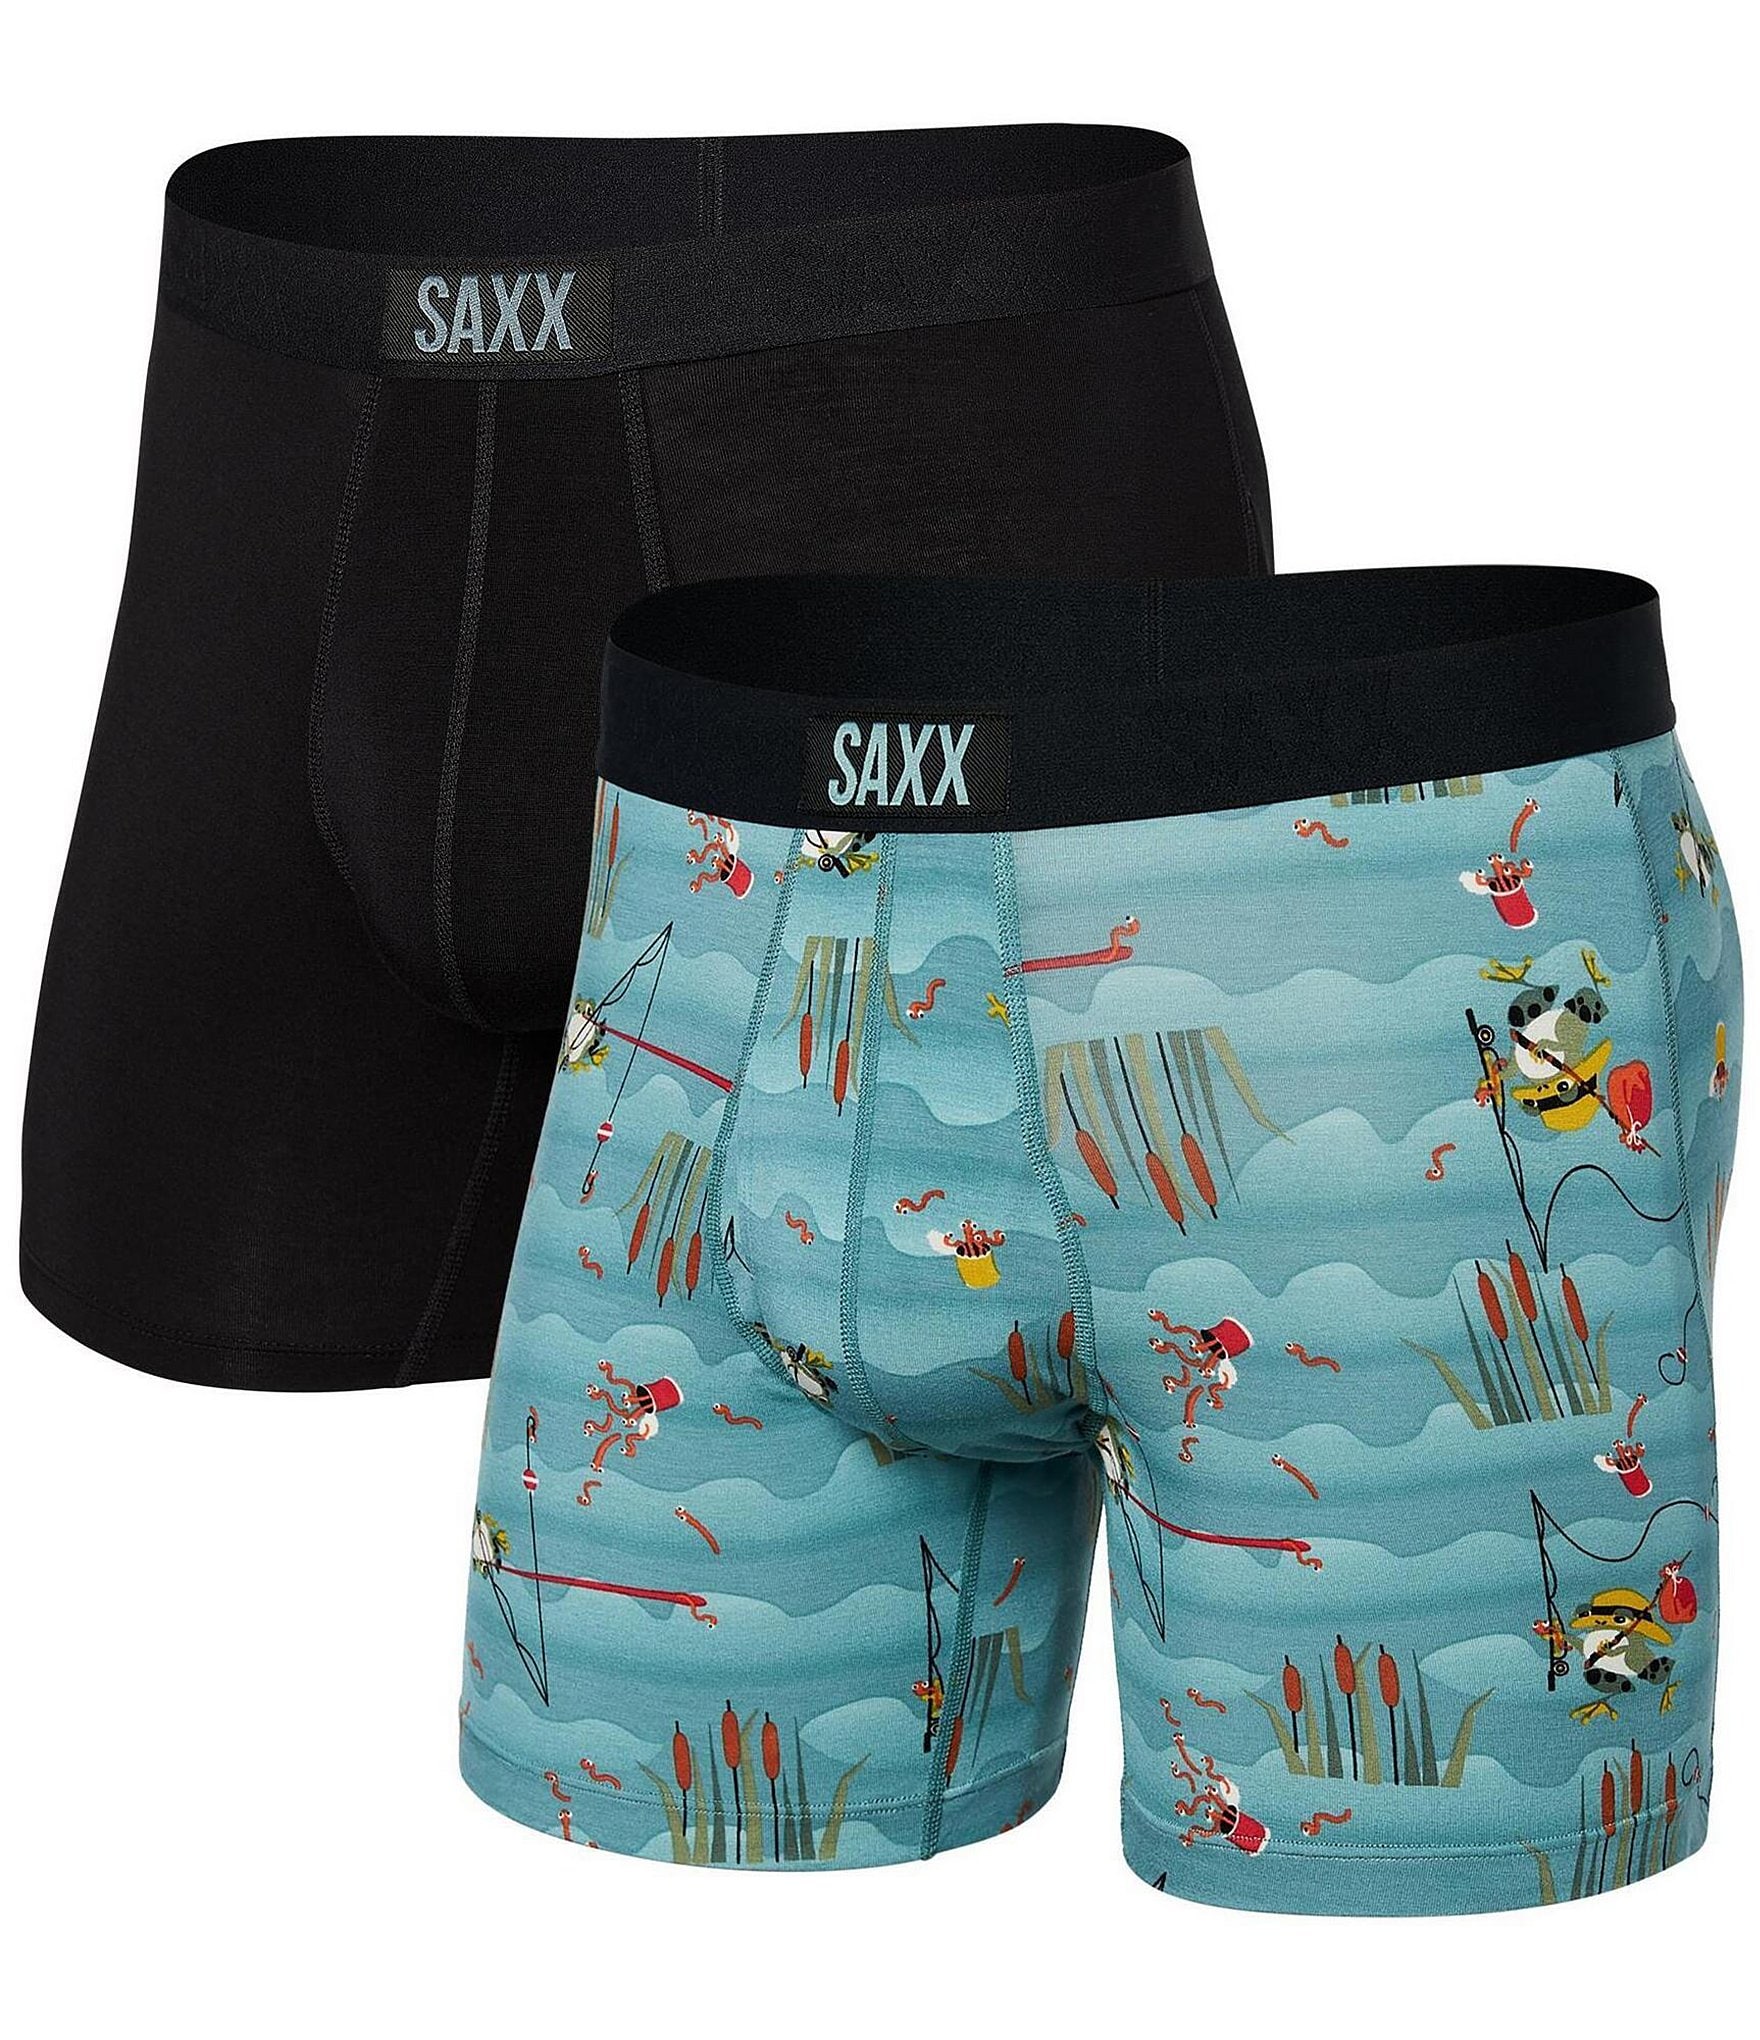 SAXX Men's Ultra 2-Pack Boxer Briefs - Red Ombre & Navy $ 60.95